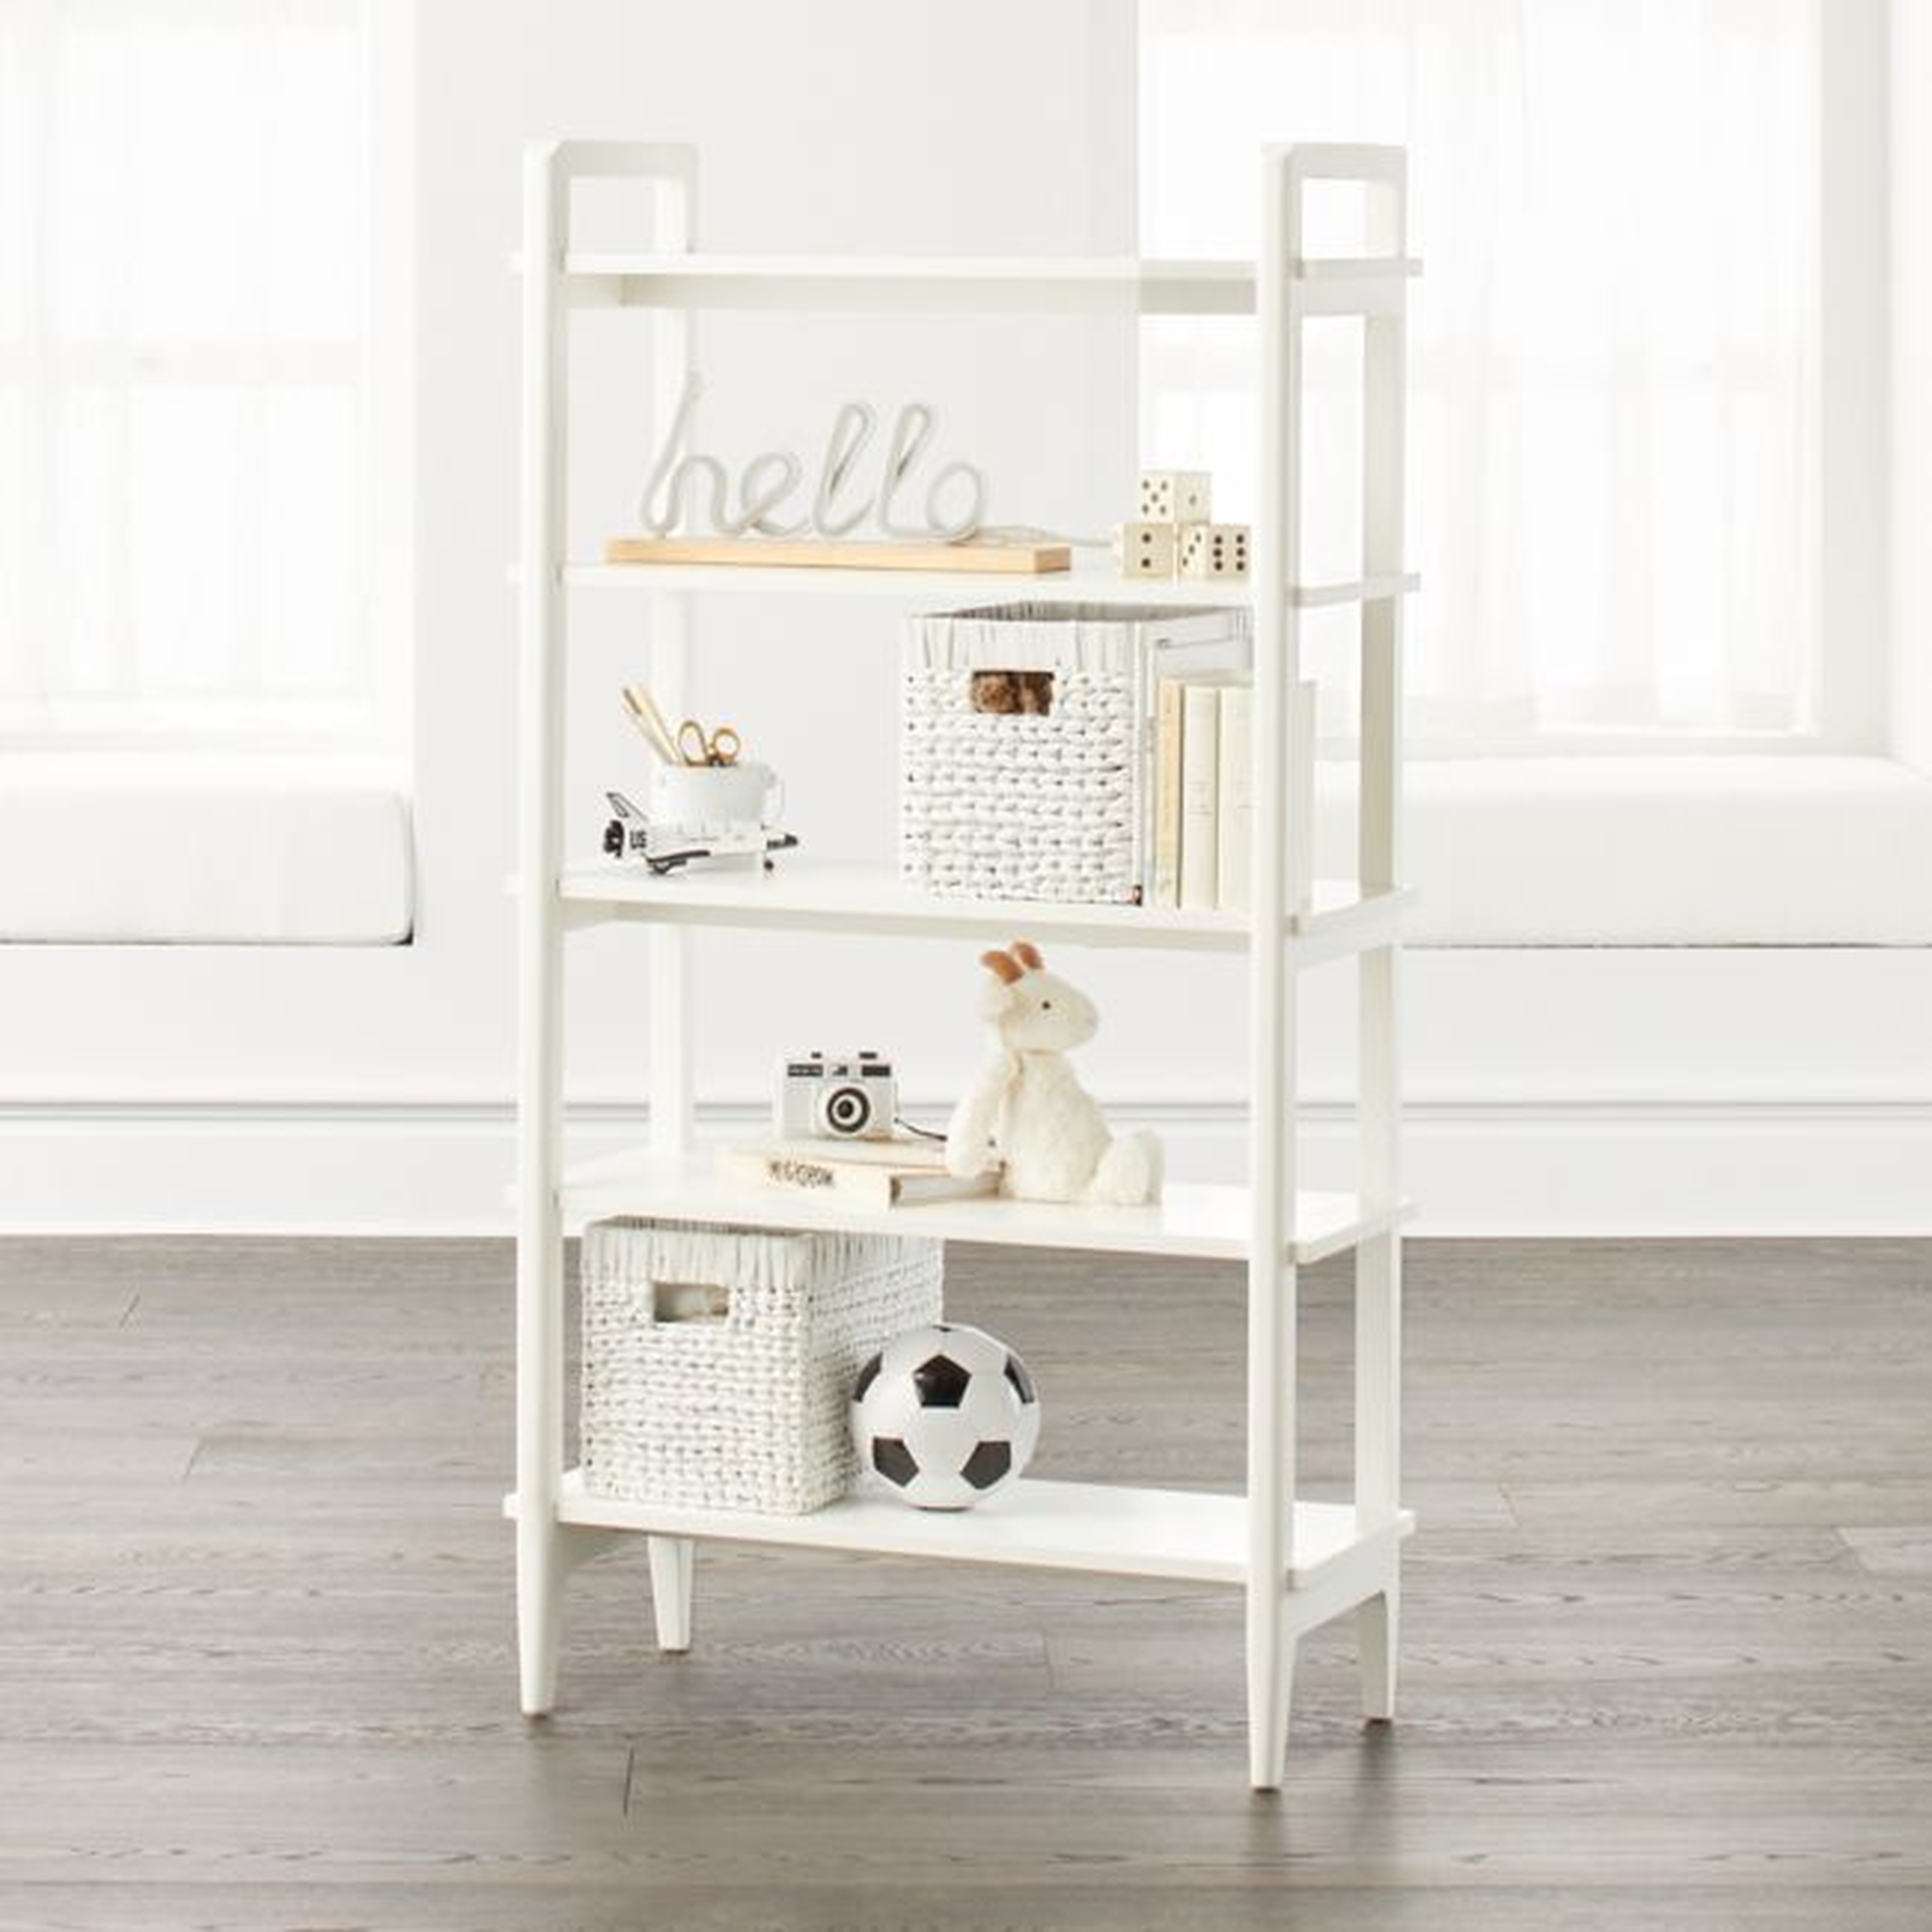 Wrightwood Tall White Bookcase - Crate and Barrel